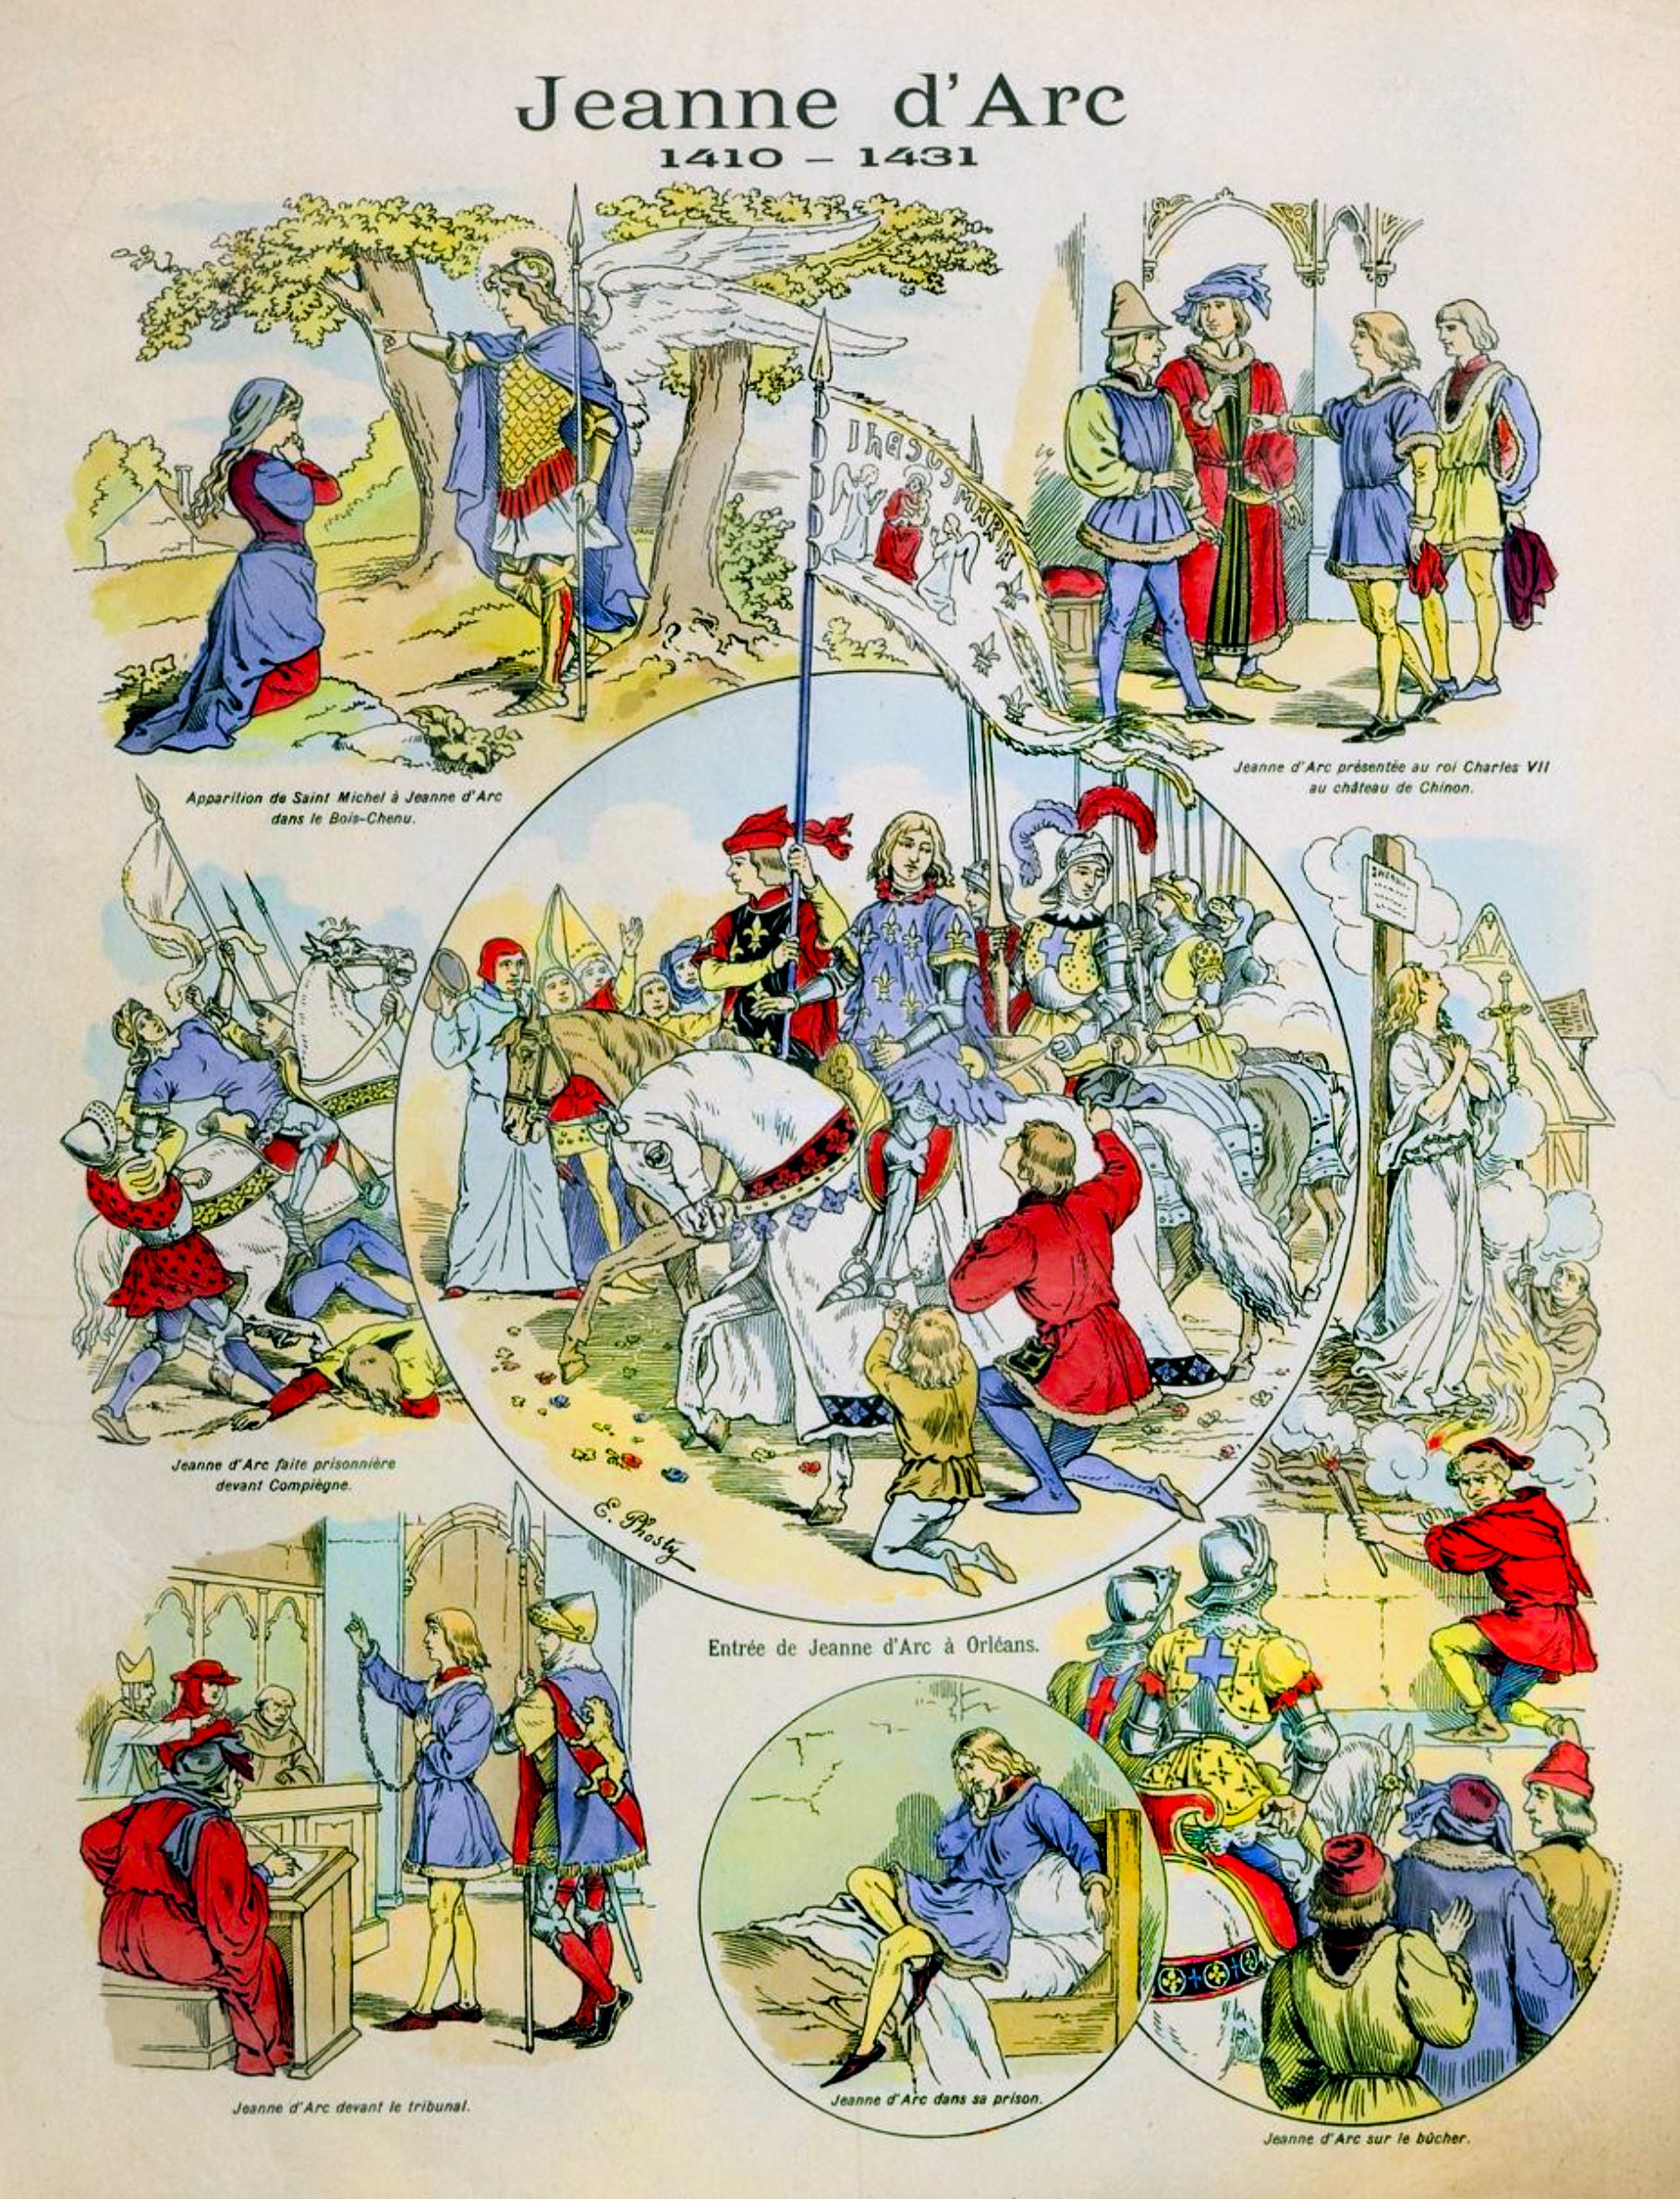 An illustrated poster of the life of Joan of Arc, a French heroine and saint. The poster is divided into multiple panels, each depicting a different scene from her life. The center panel shows Joan of Arc on horseback, leading an army into battle. The other panels show her as a young girl, receiving a vision from Saint Michael, being presented to the king Charles VII, entering Orleans, and being burned at the stake. The poster is titled “Jeanne d’Arc 1410-1431” at the top.